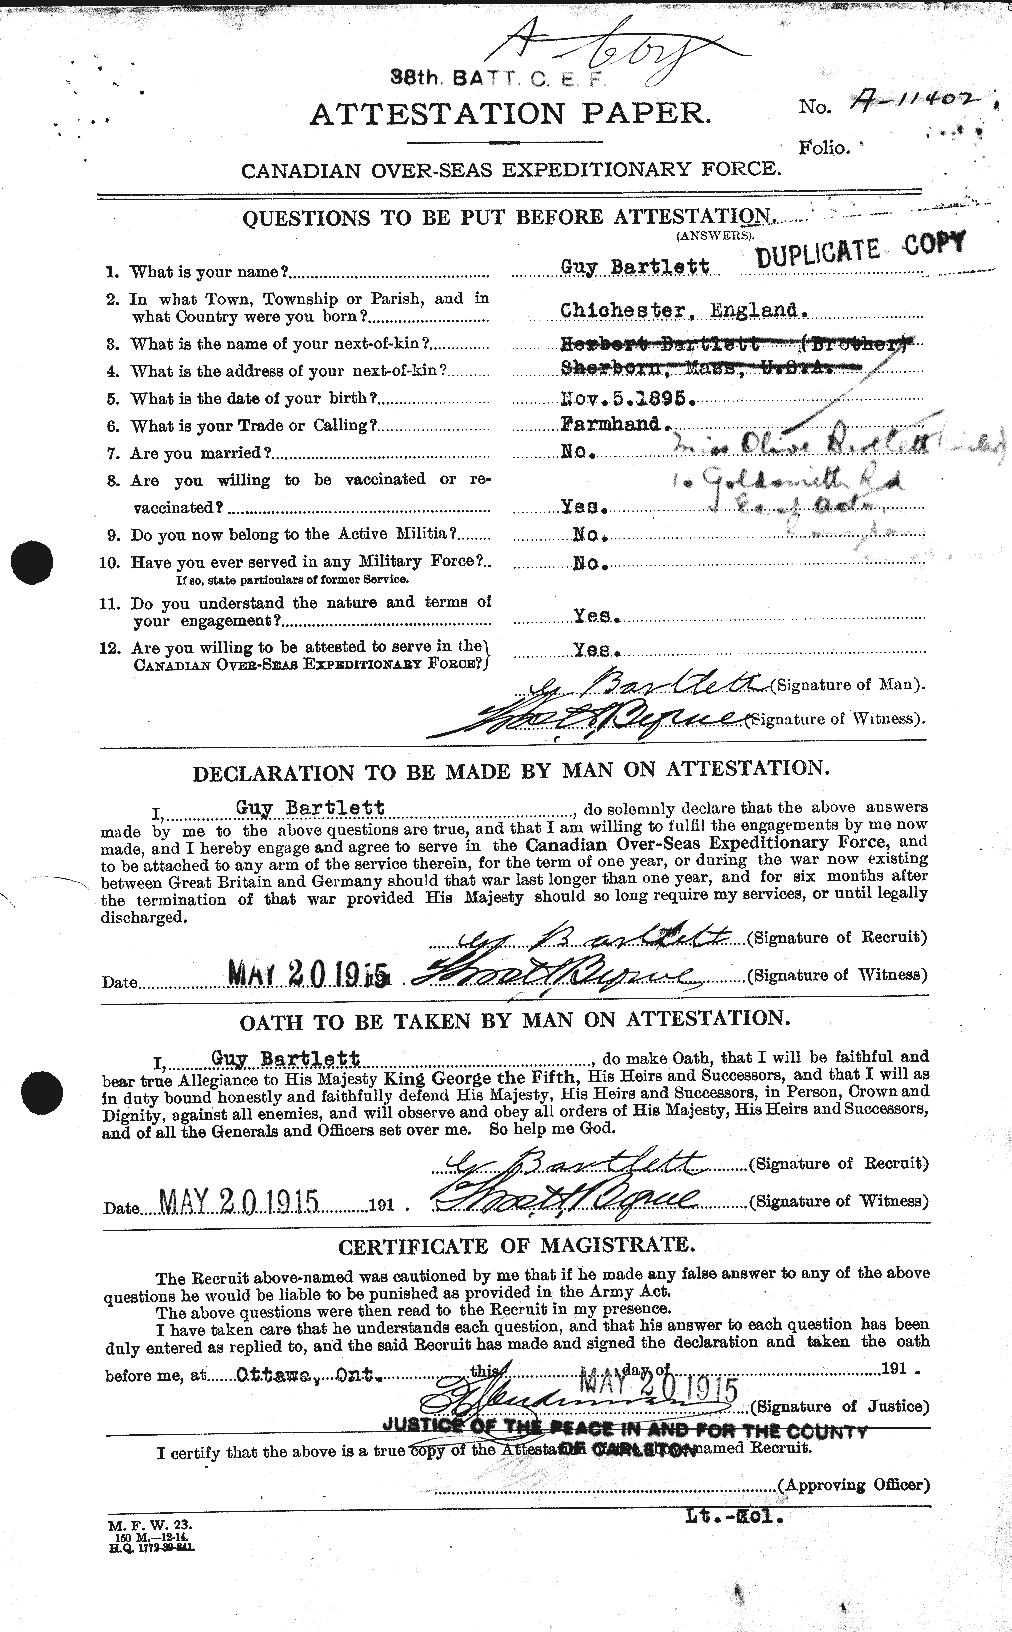 Personnel Records of the First World War - CEF 229250a